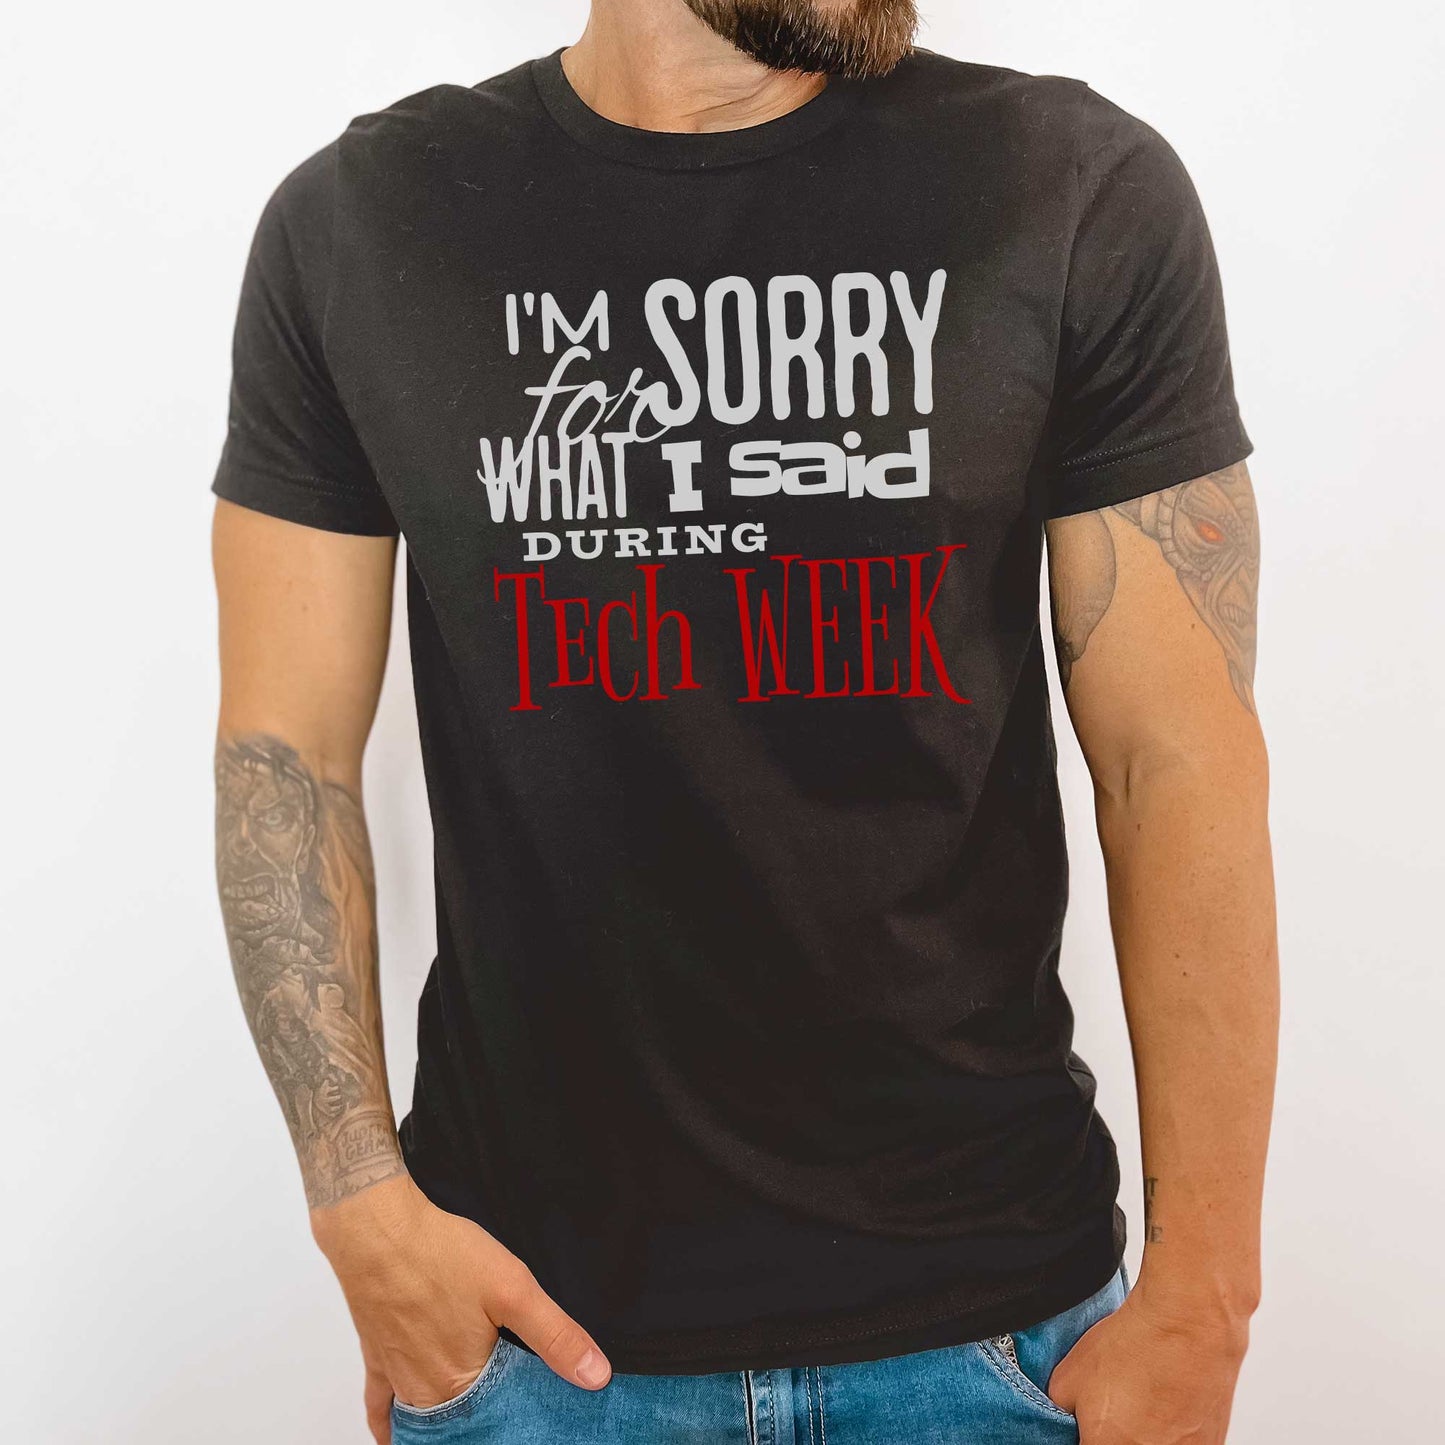 I'm Sorry for What I Said During Tech Week - Adult Unisex Jersey Crew Tee